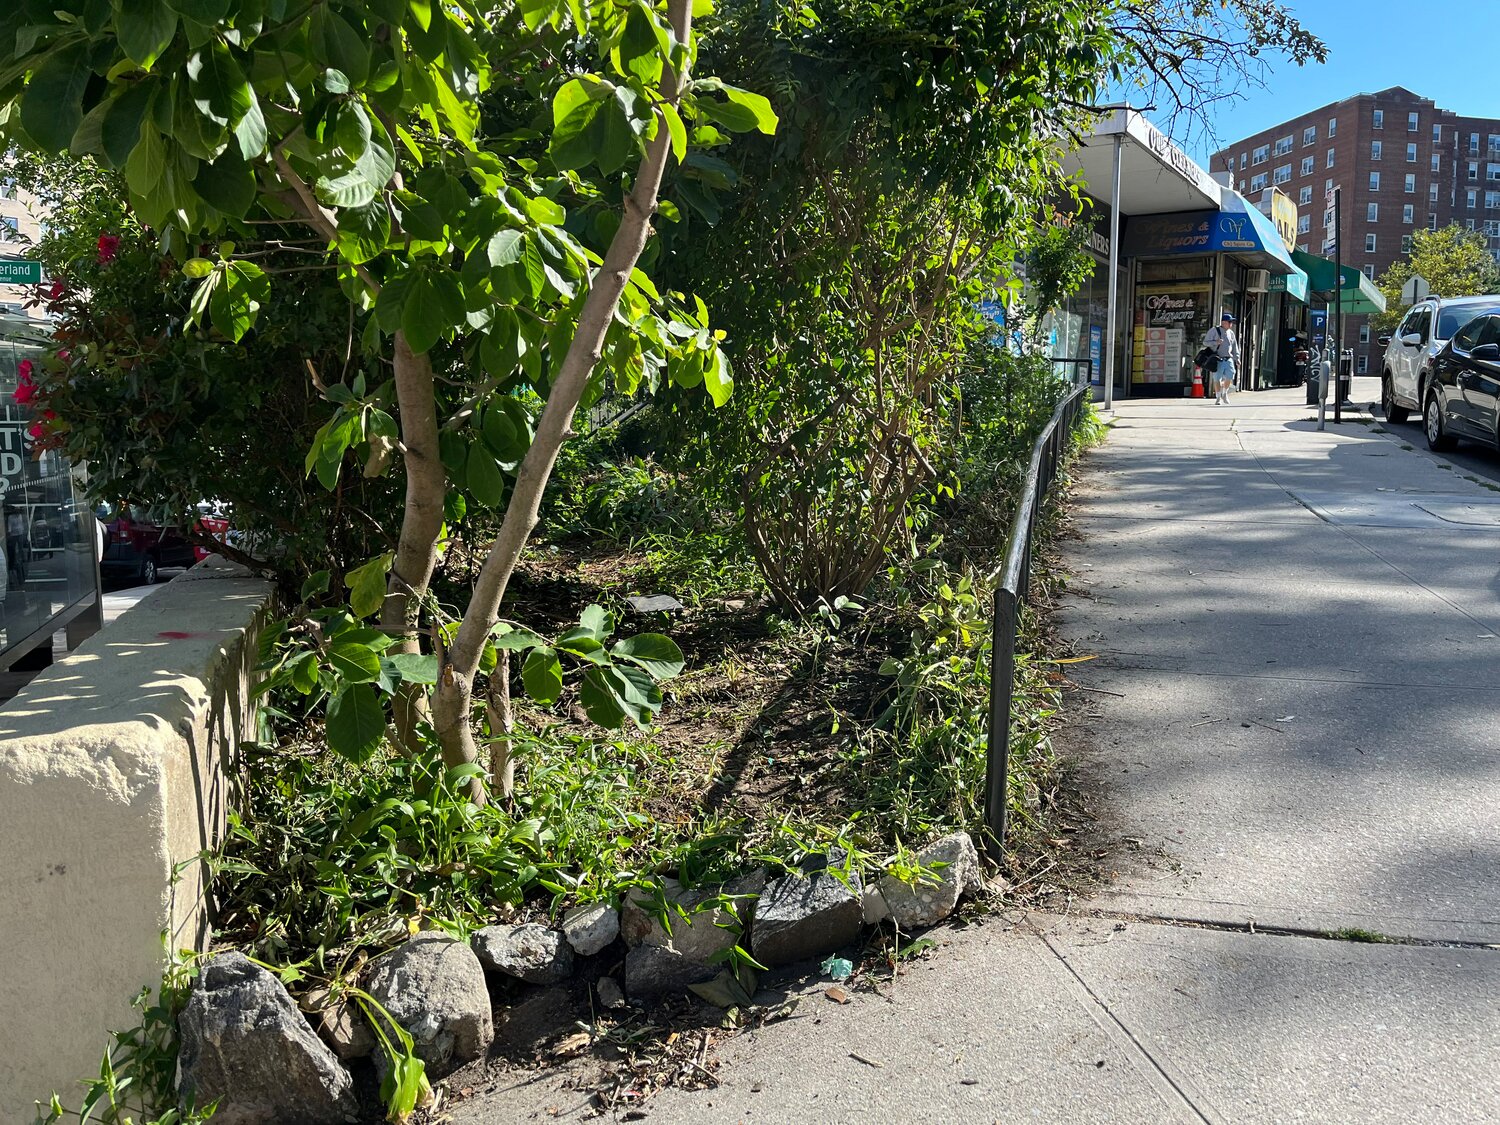 The Kappock Street garden has four sections to it. One of it is along the intersection at Knolls Crescent and Kappock Street, there’s “the stair street,” “the tree pits,” and “the triangle garden.”